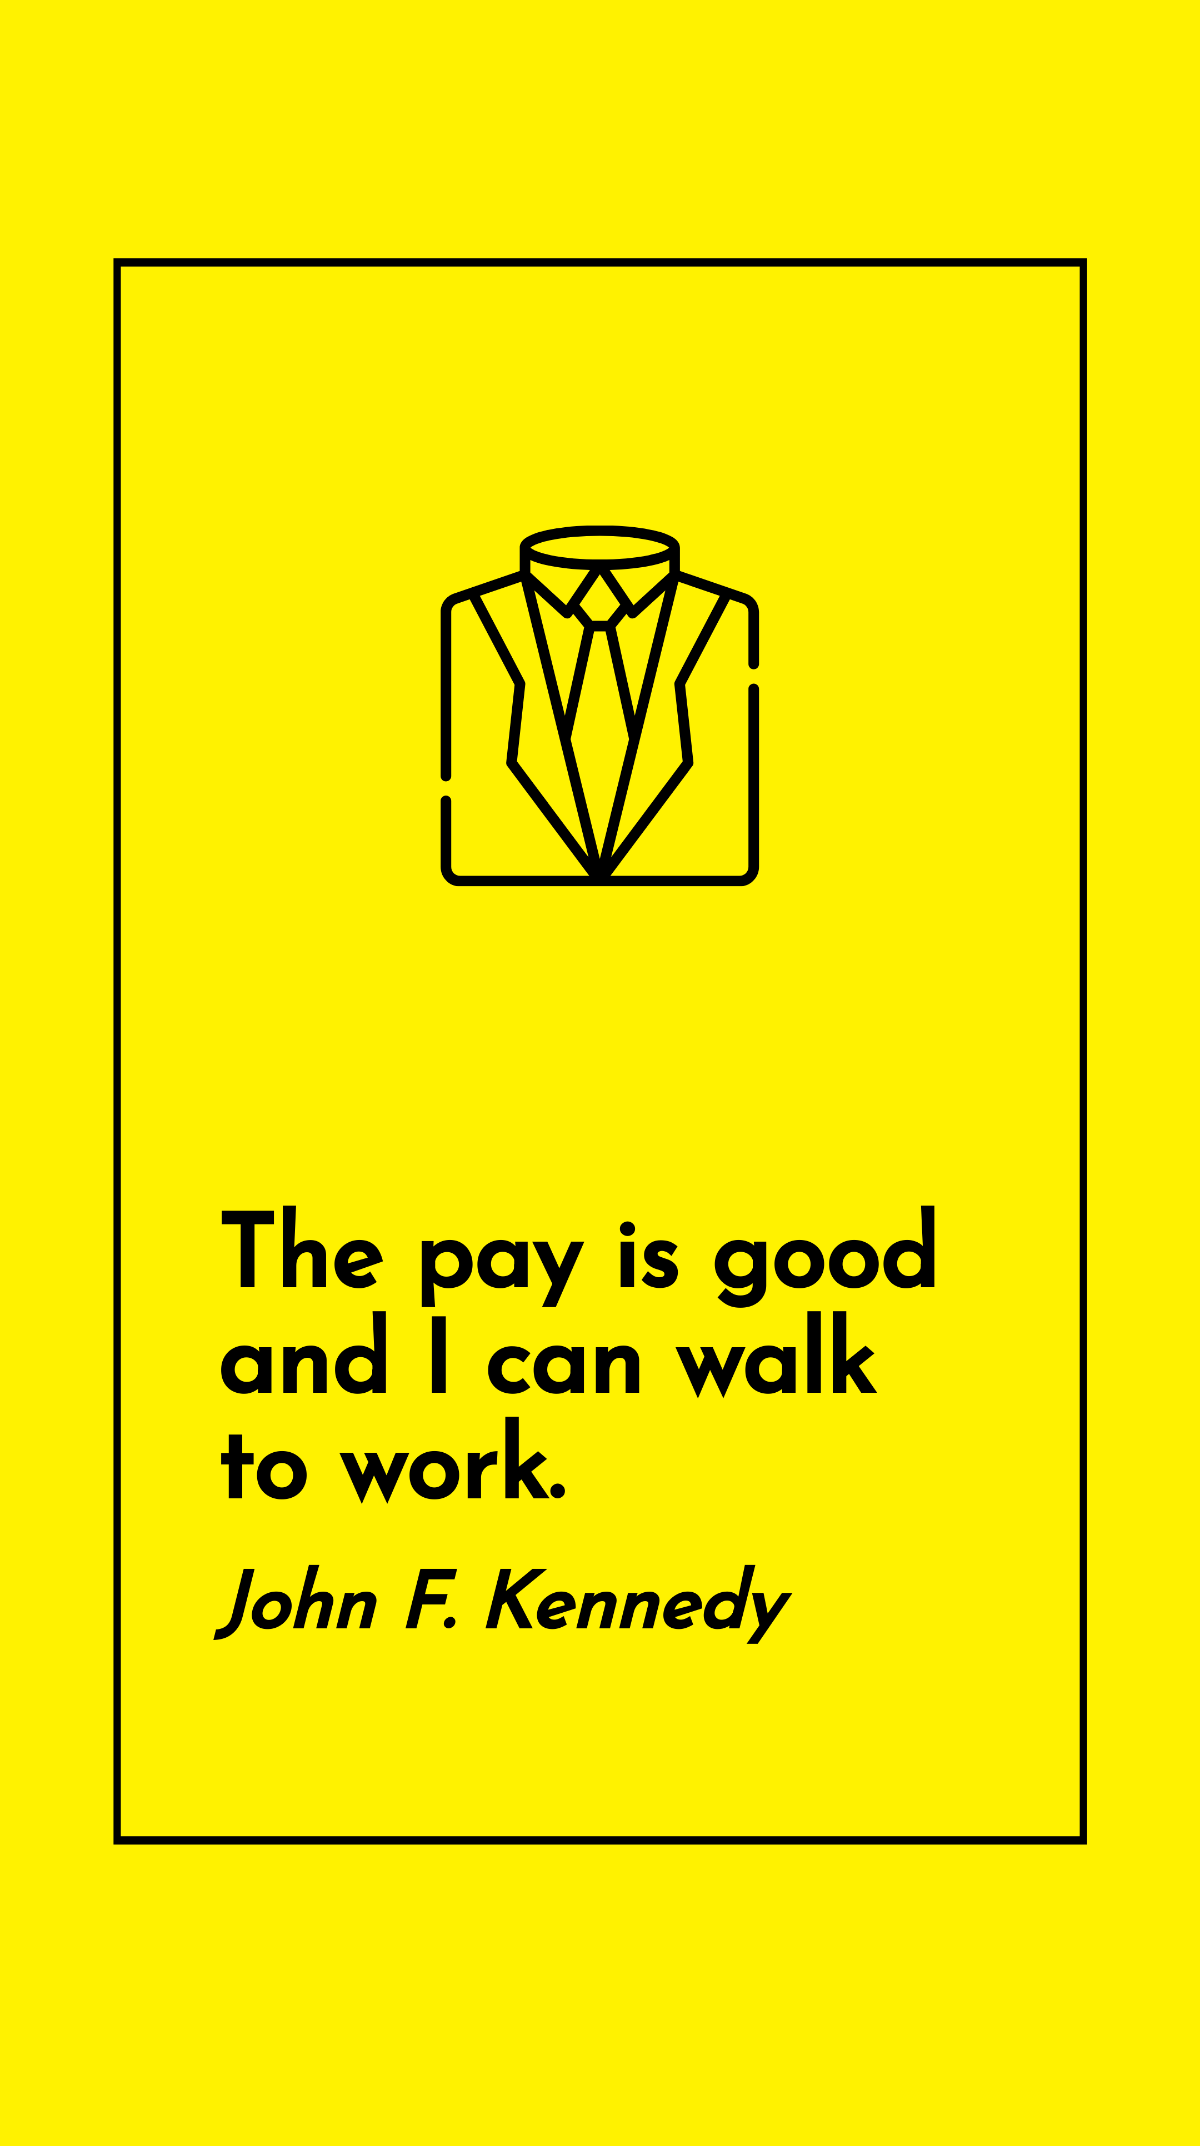 Free John F. Kennedy - The pay is good and I can walk to work. Template